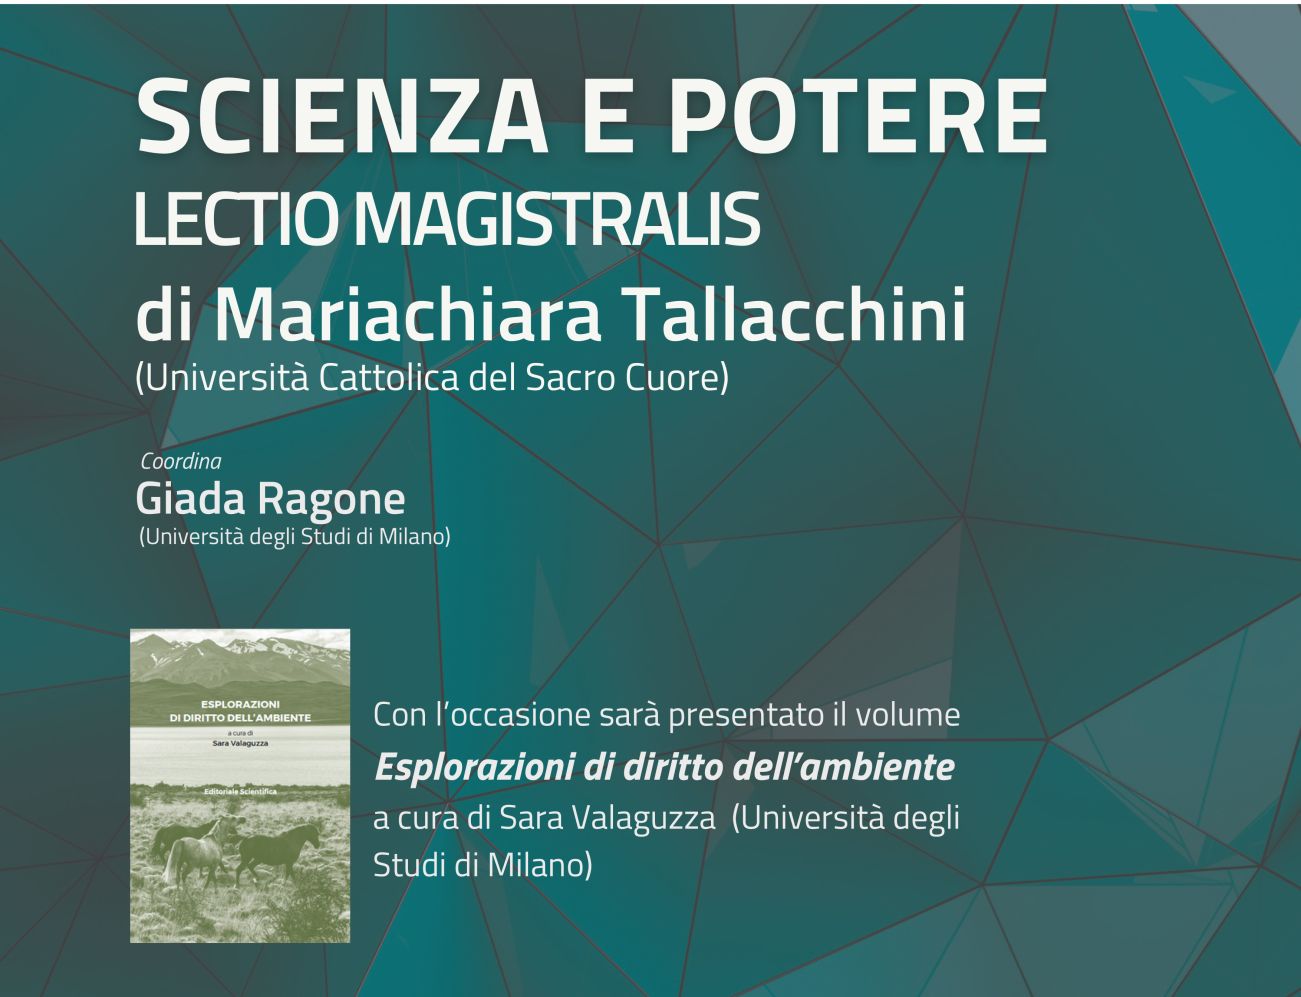 ‘Science and Power’ in the Environmental Era, an in-depth analysis of legal dynamics in Professor Mariachiara Tallacchini’s Lectio Magistralis